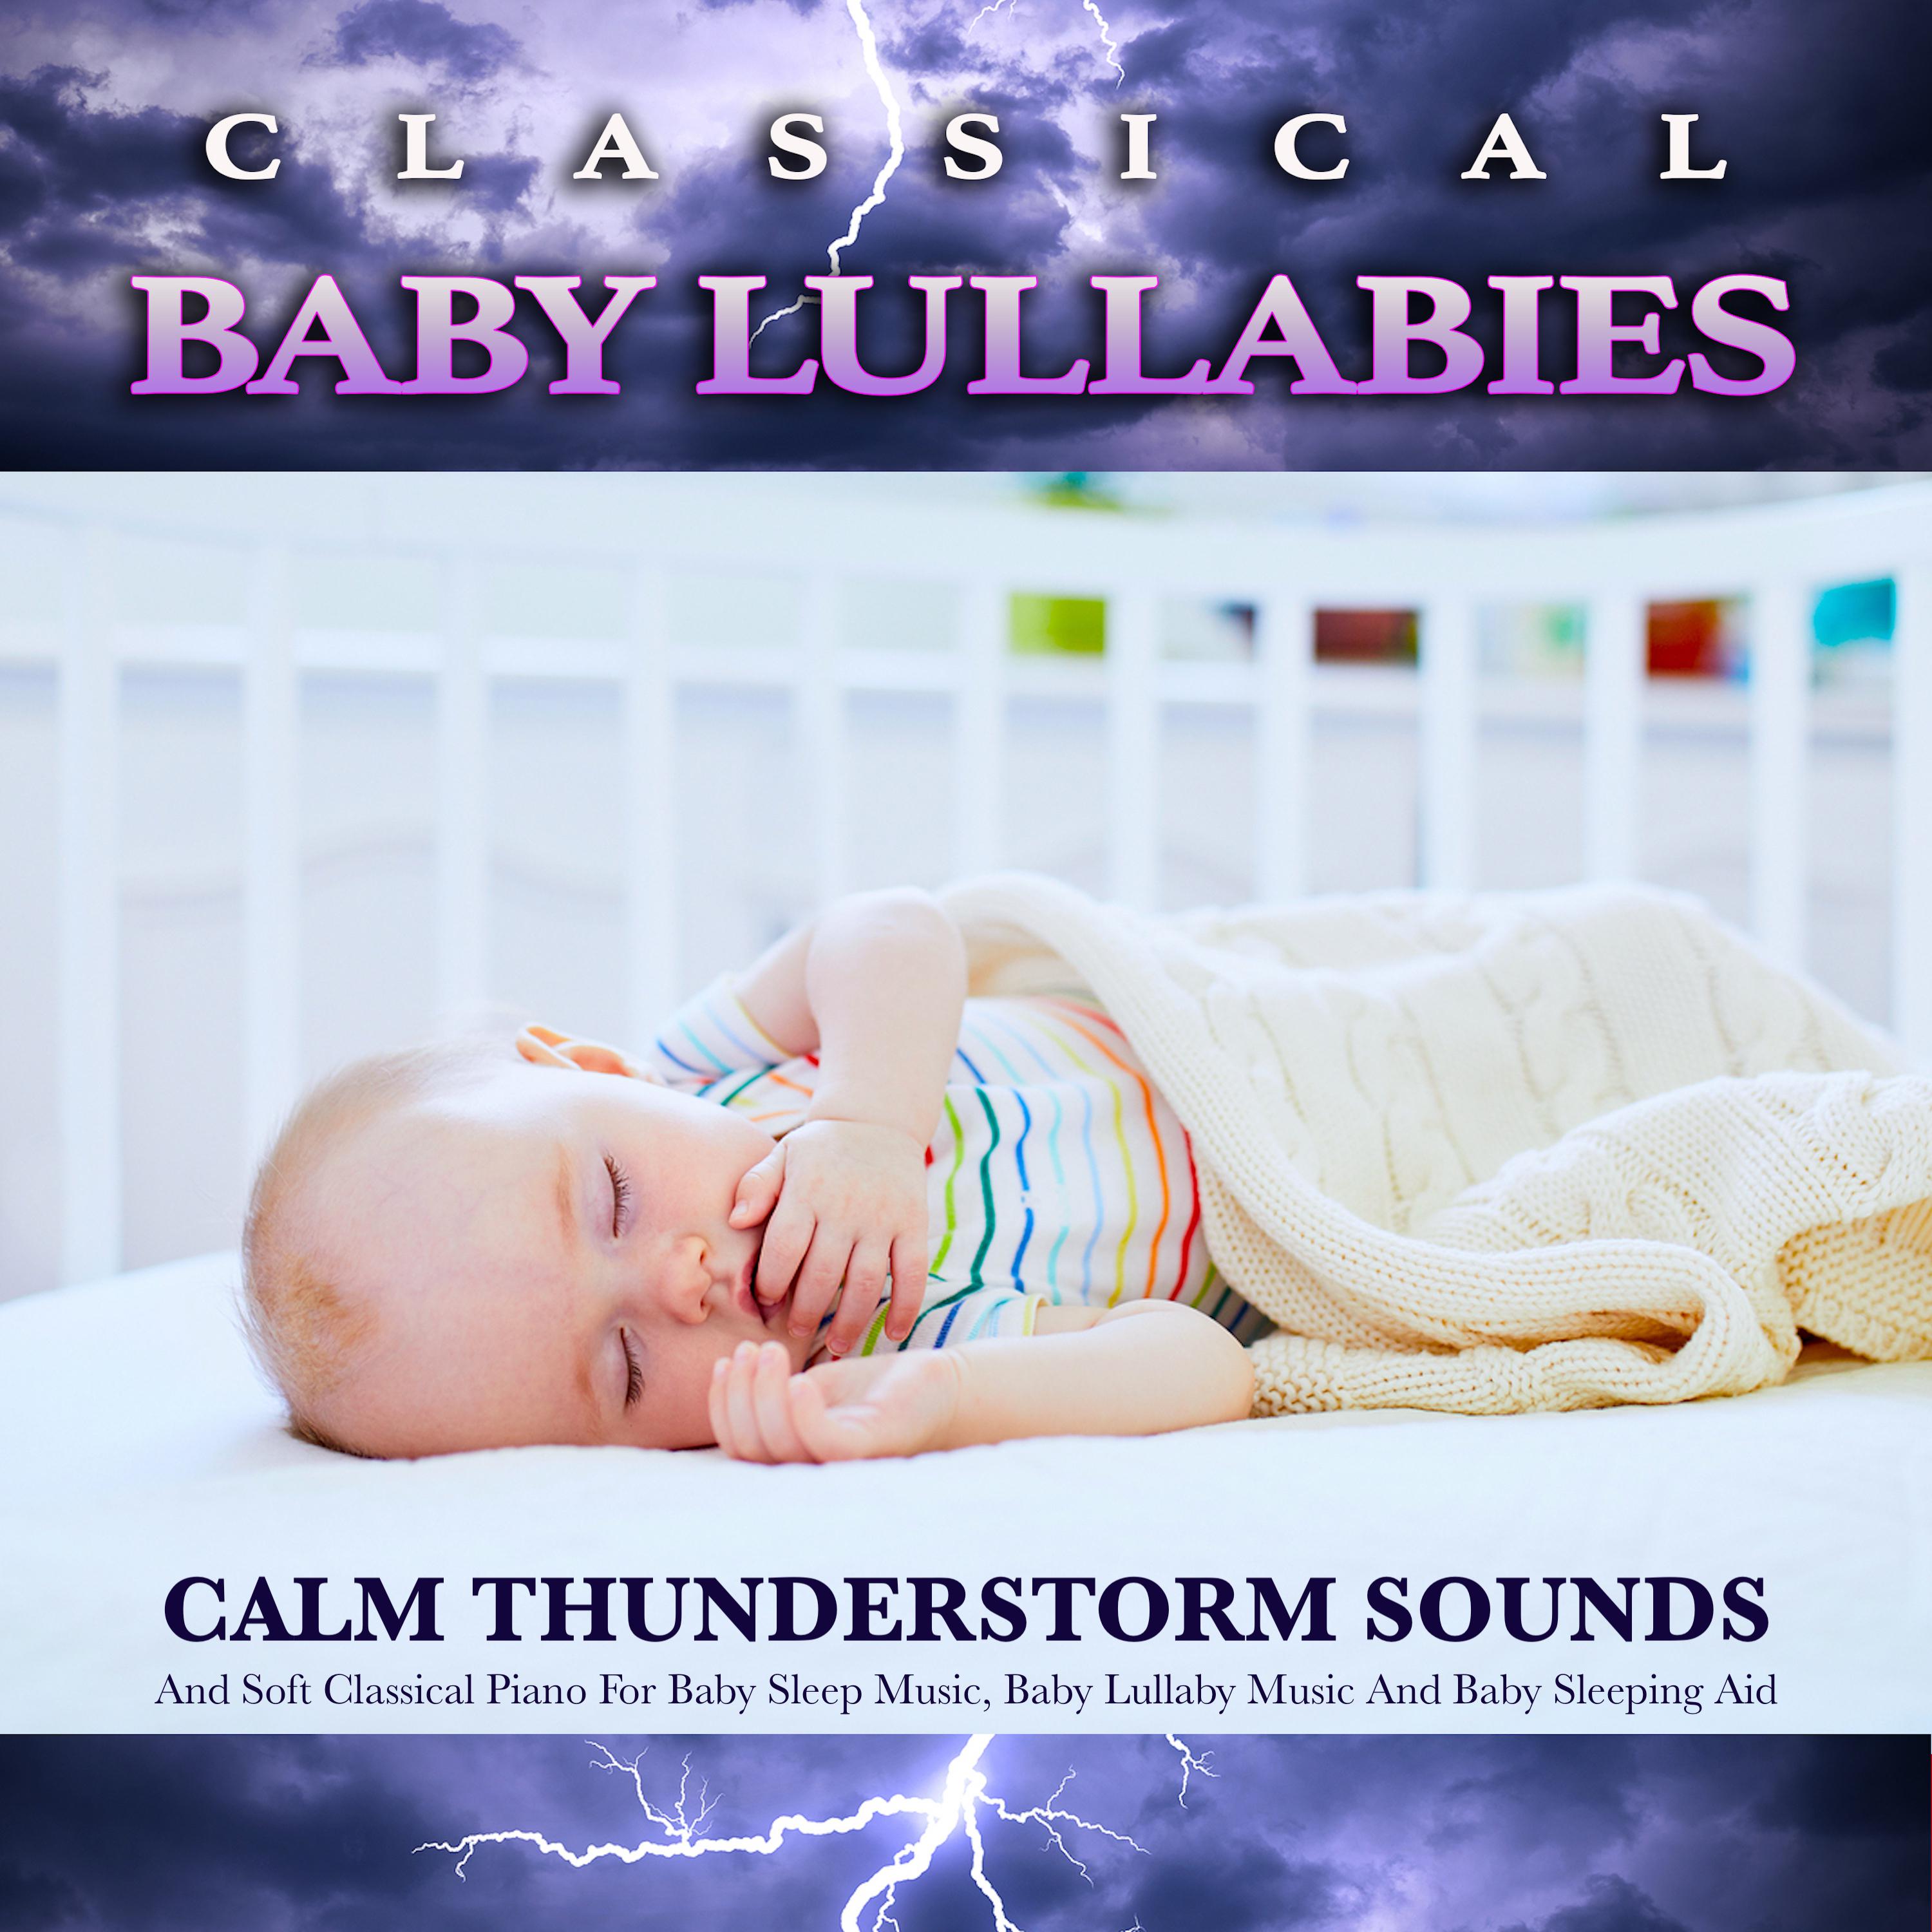 Nocturne - Chopin - Baby Lullaby - Baby Sleep Music - Classical Piano and Thunderstorm Sounds For Sleep